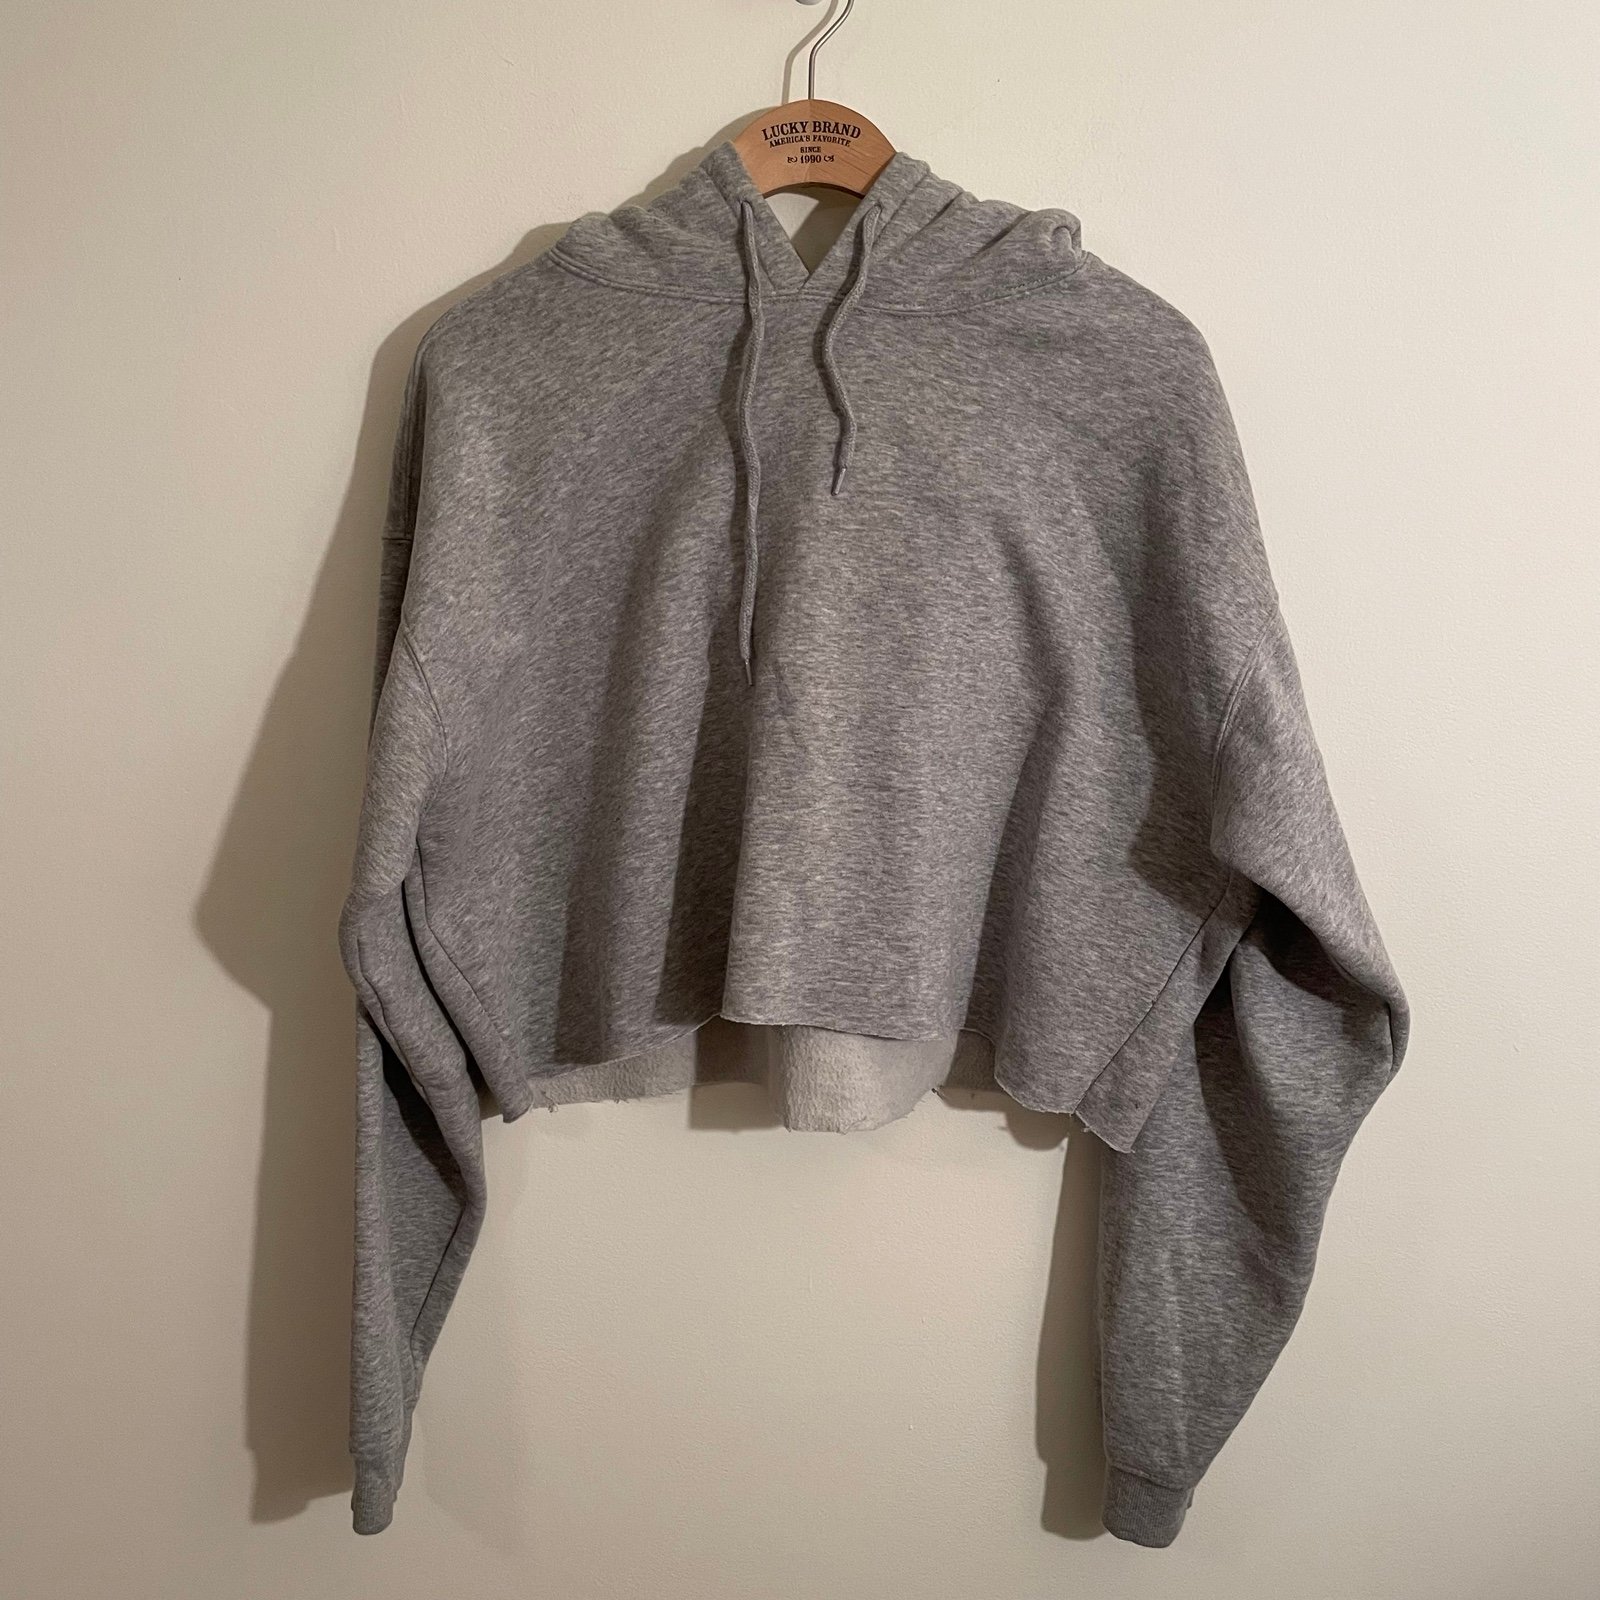 Latest  Urban Outfitters cropped hoodie m8St99OSX High 